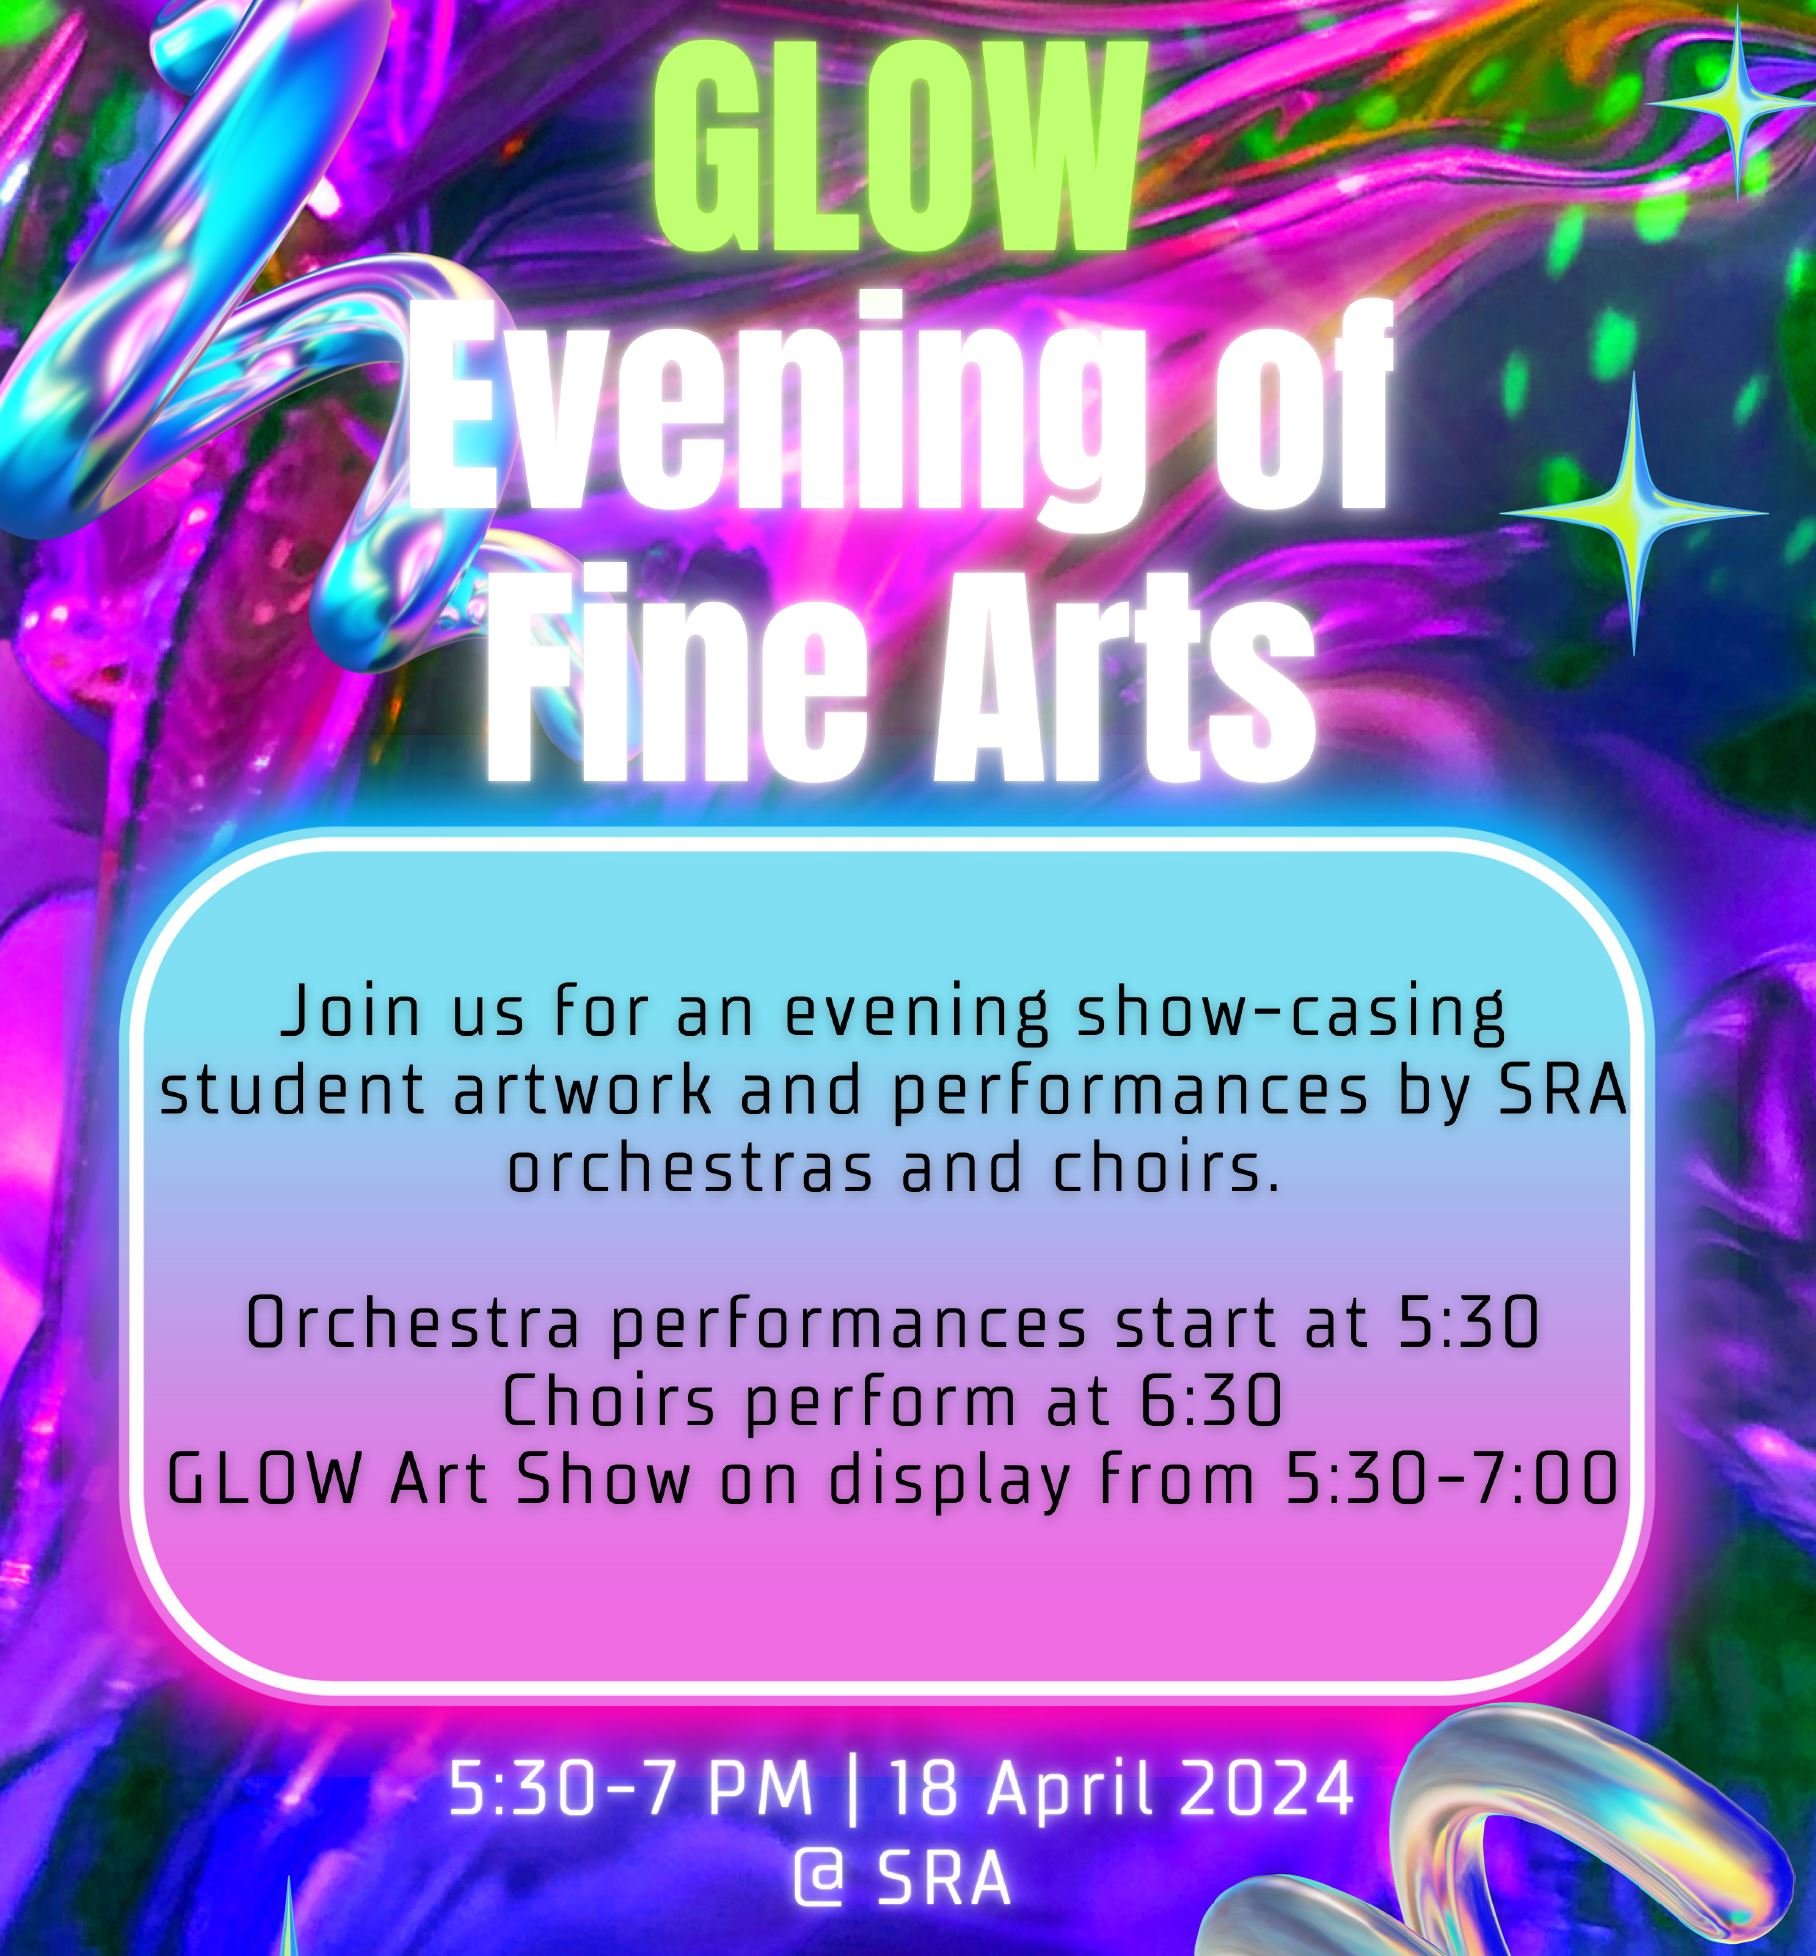 Don't forget the Evening of Fine Arts is happening next Thursday! All the students will have artwork displayed. We hope to see you there!